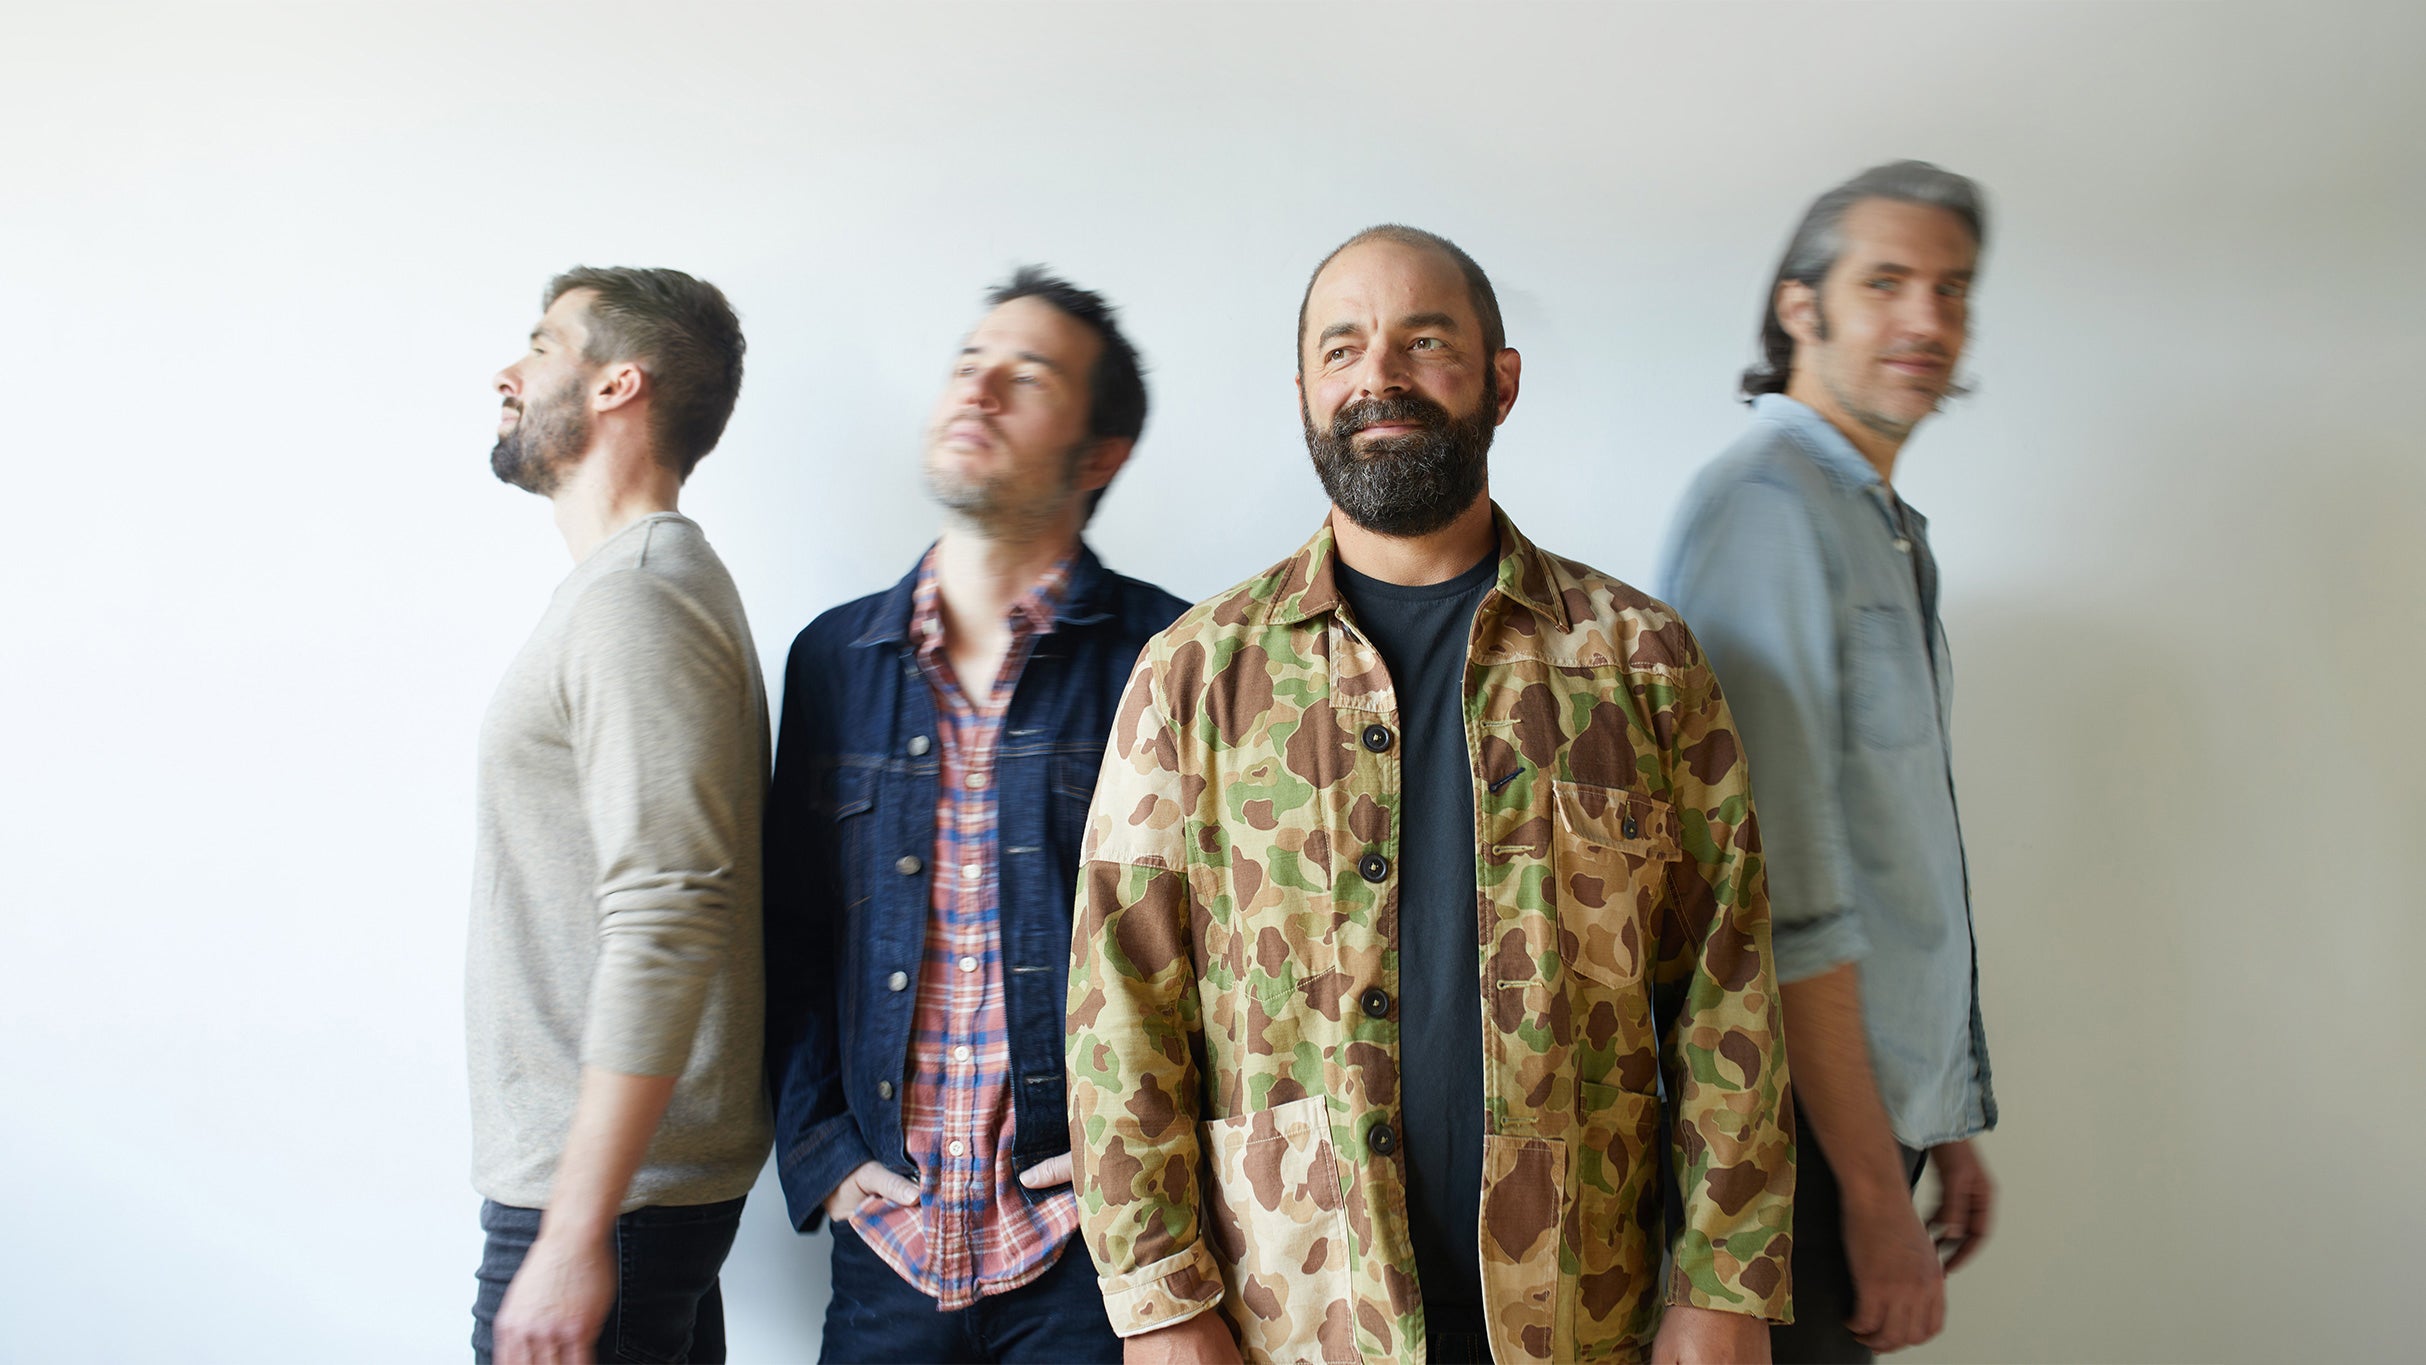 Drew Holcomb and the Neighbors free presale password for early tickets in Fort Worth